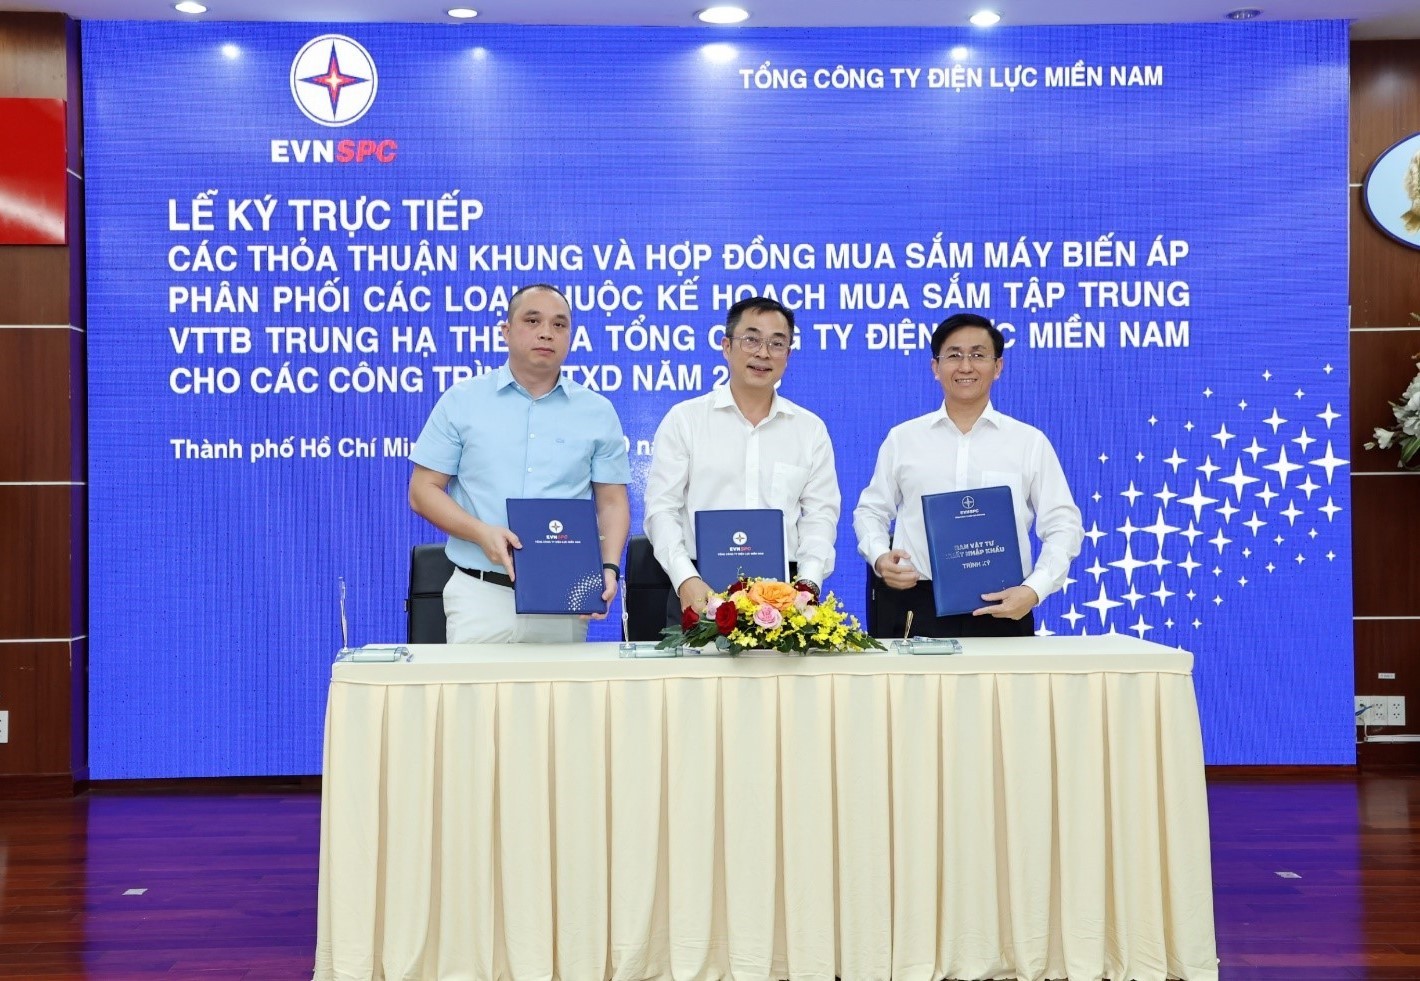 Emc Signs Contract Contract Buying Sam Mba Parts For Evn Spc Construction Equipment Dung Nam 2023